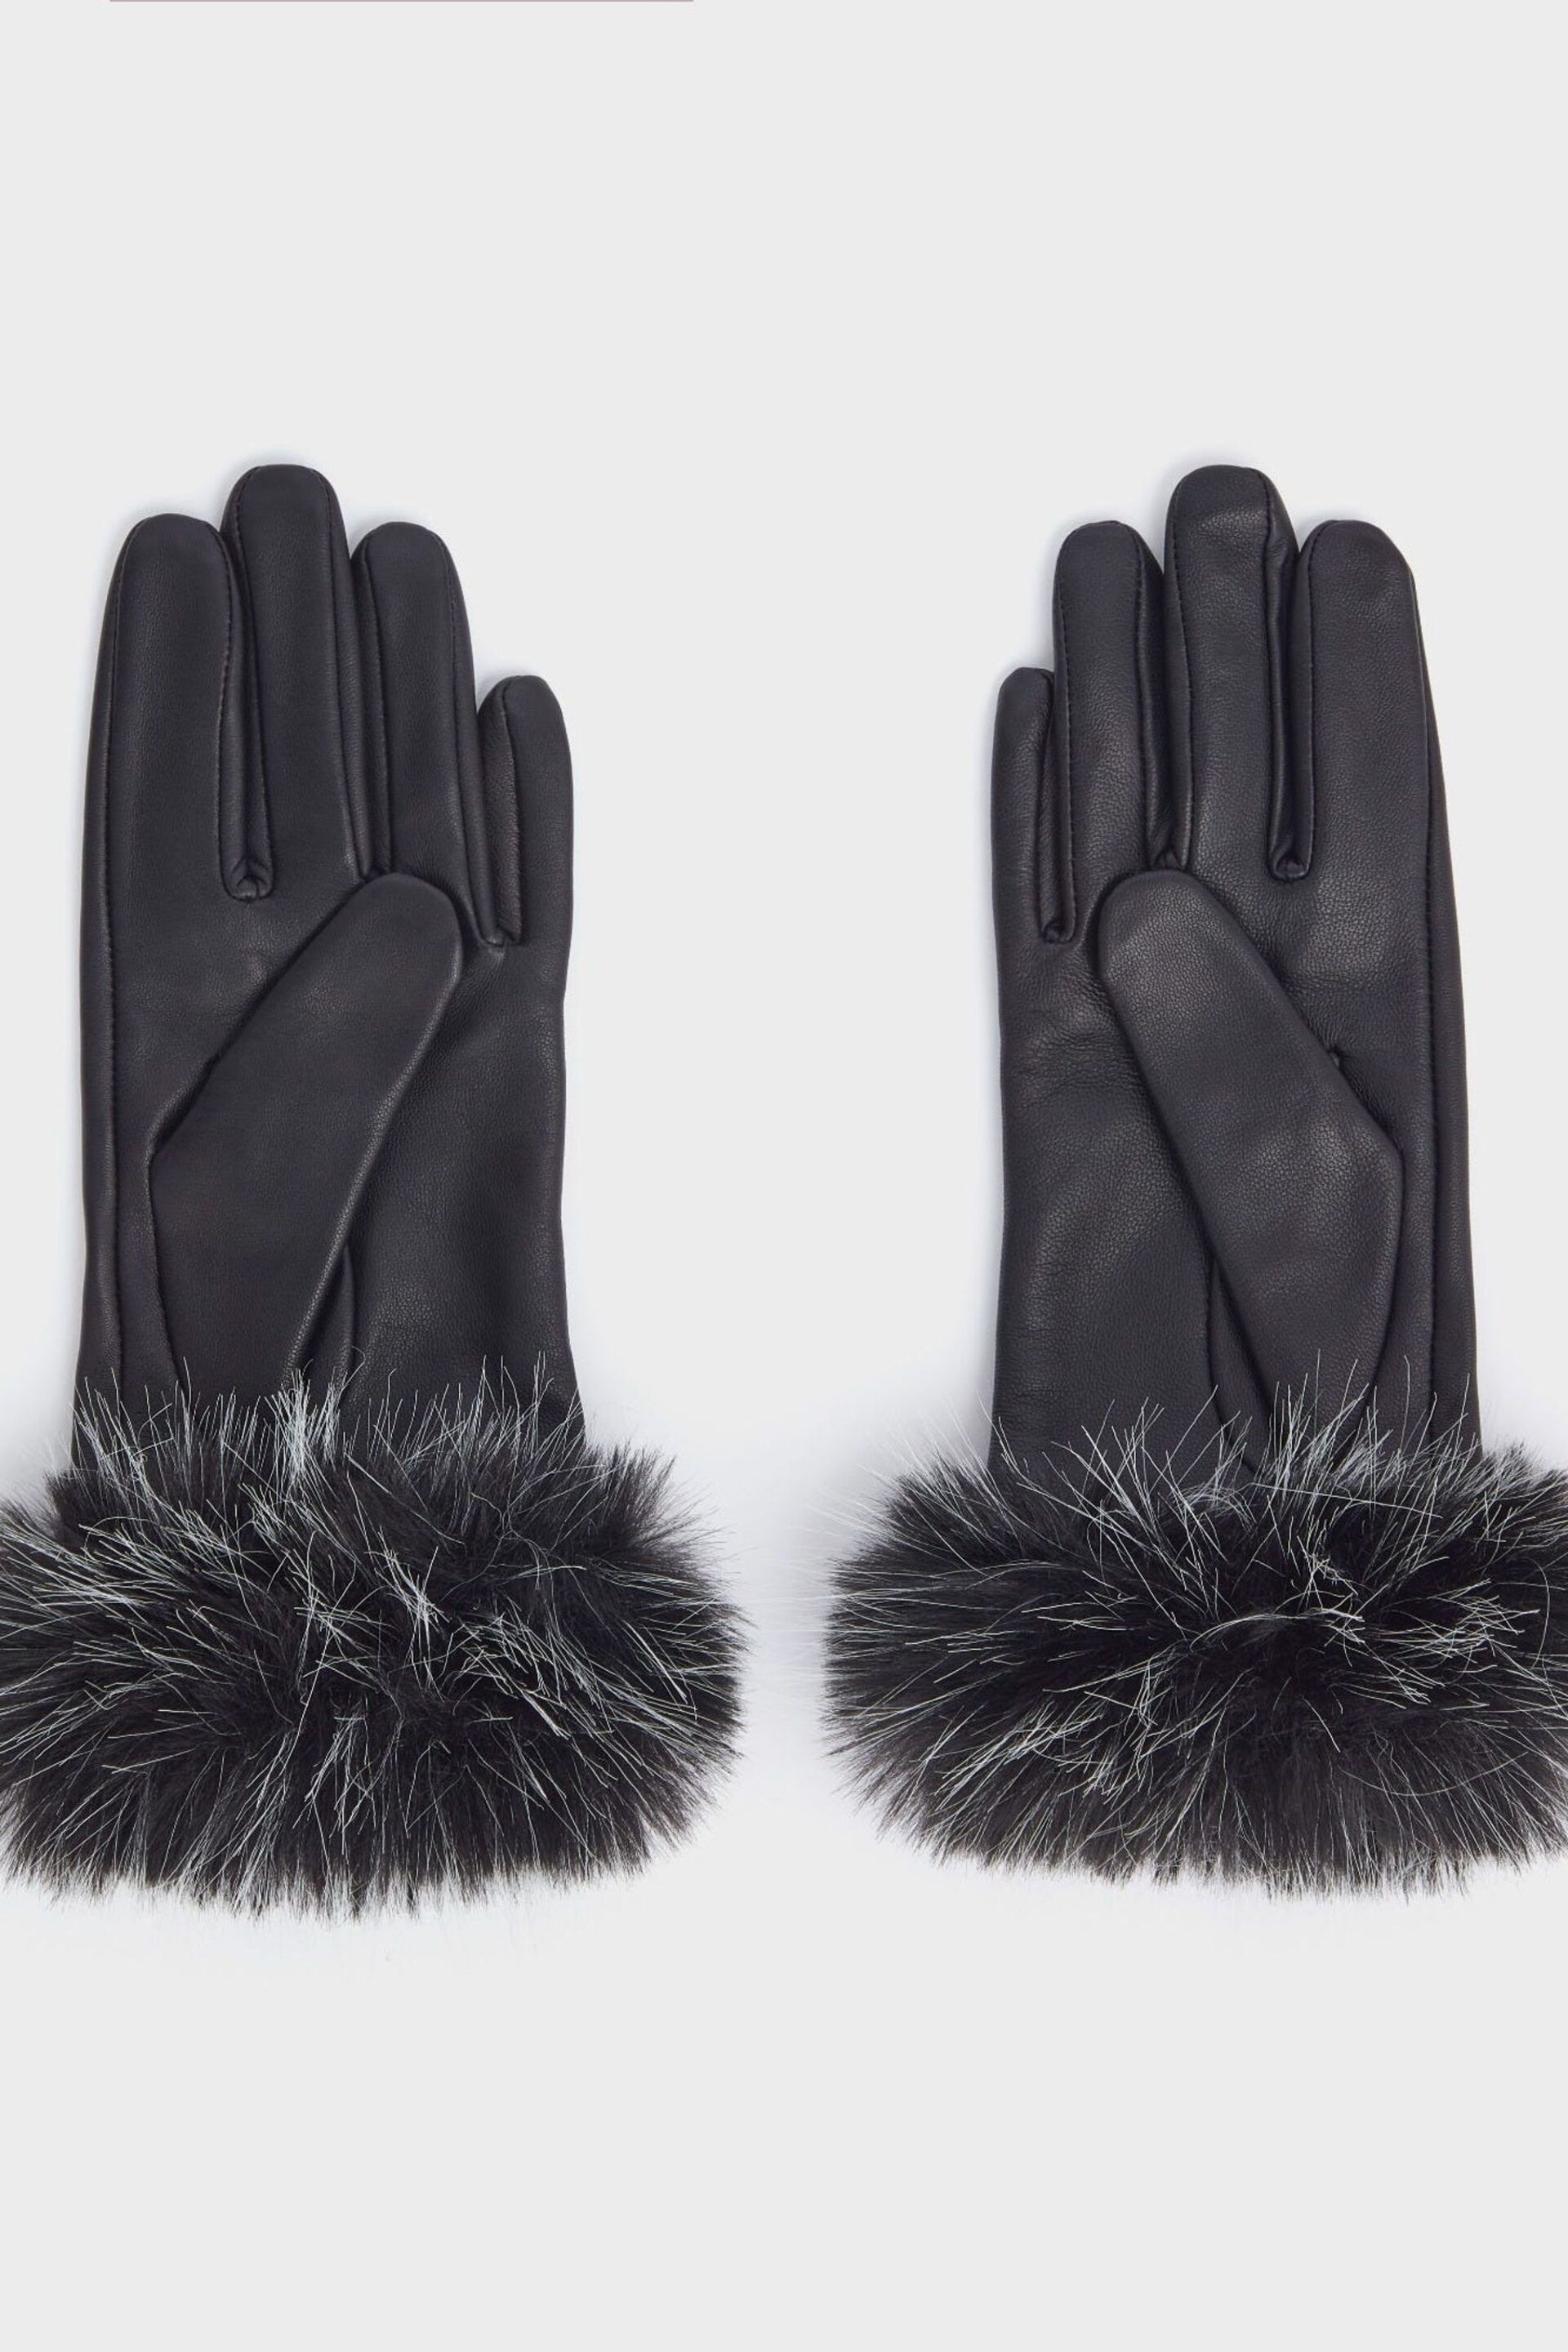 Osprey London The Penny Leather Gloves - Image 3 of 5